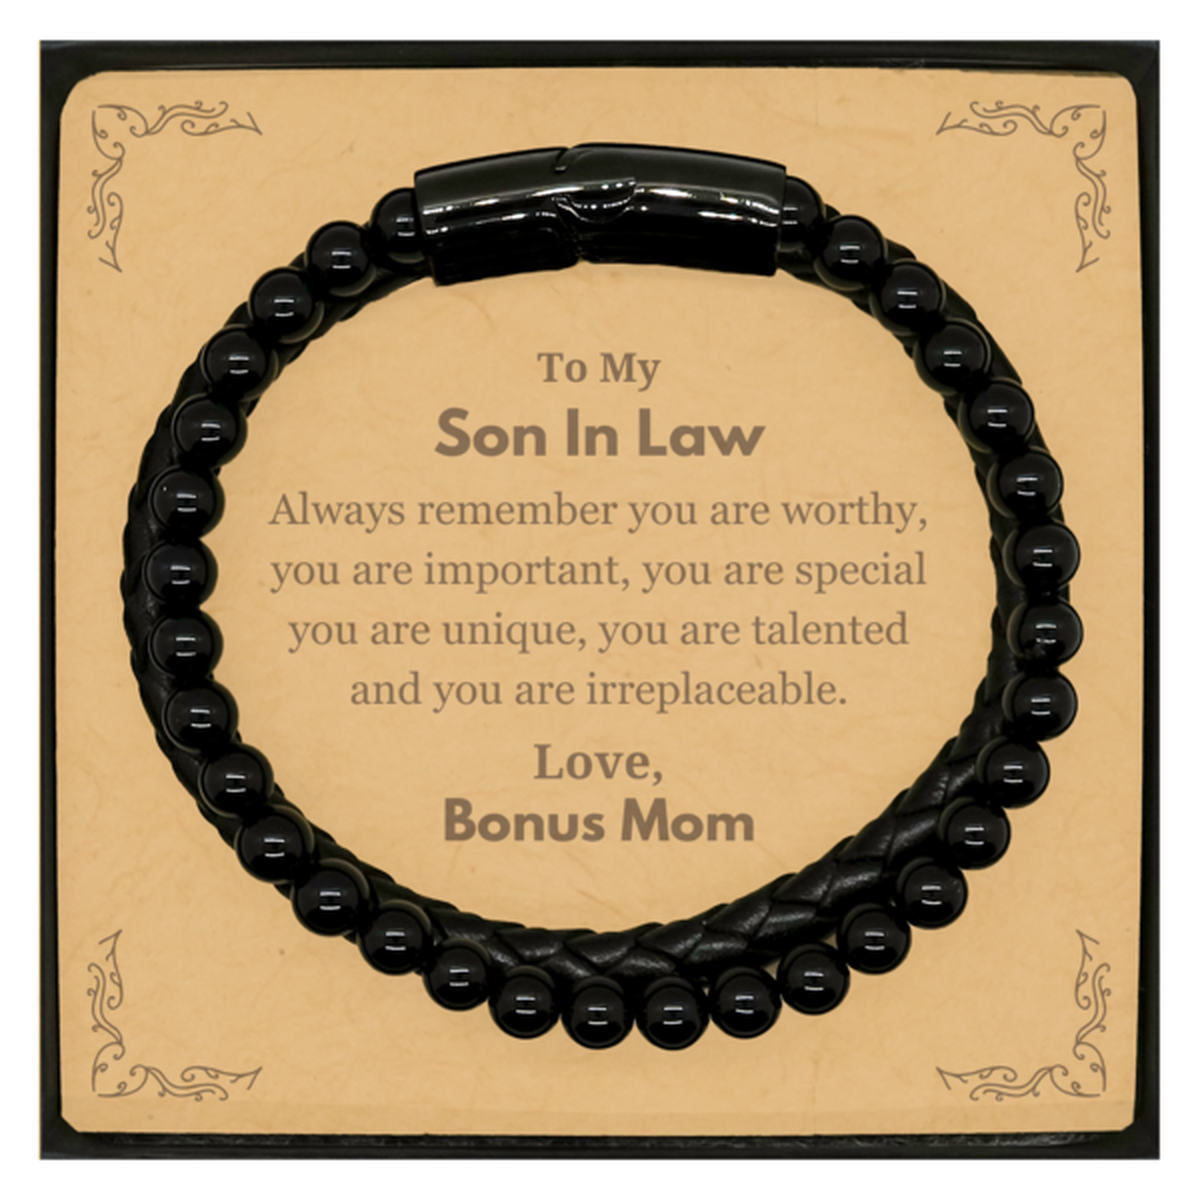 Son In Law Birthday Gifts from Bonus Mom, Inspirational Stone Leather Bracelets for Son In Law Christmas Graduation Gifts for Son In Law Always remember you are worthy, you are important. Love, Bonus Mom